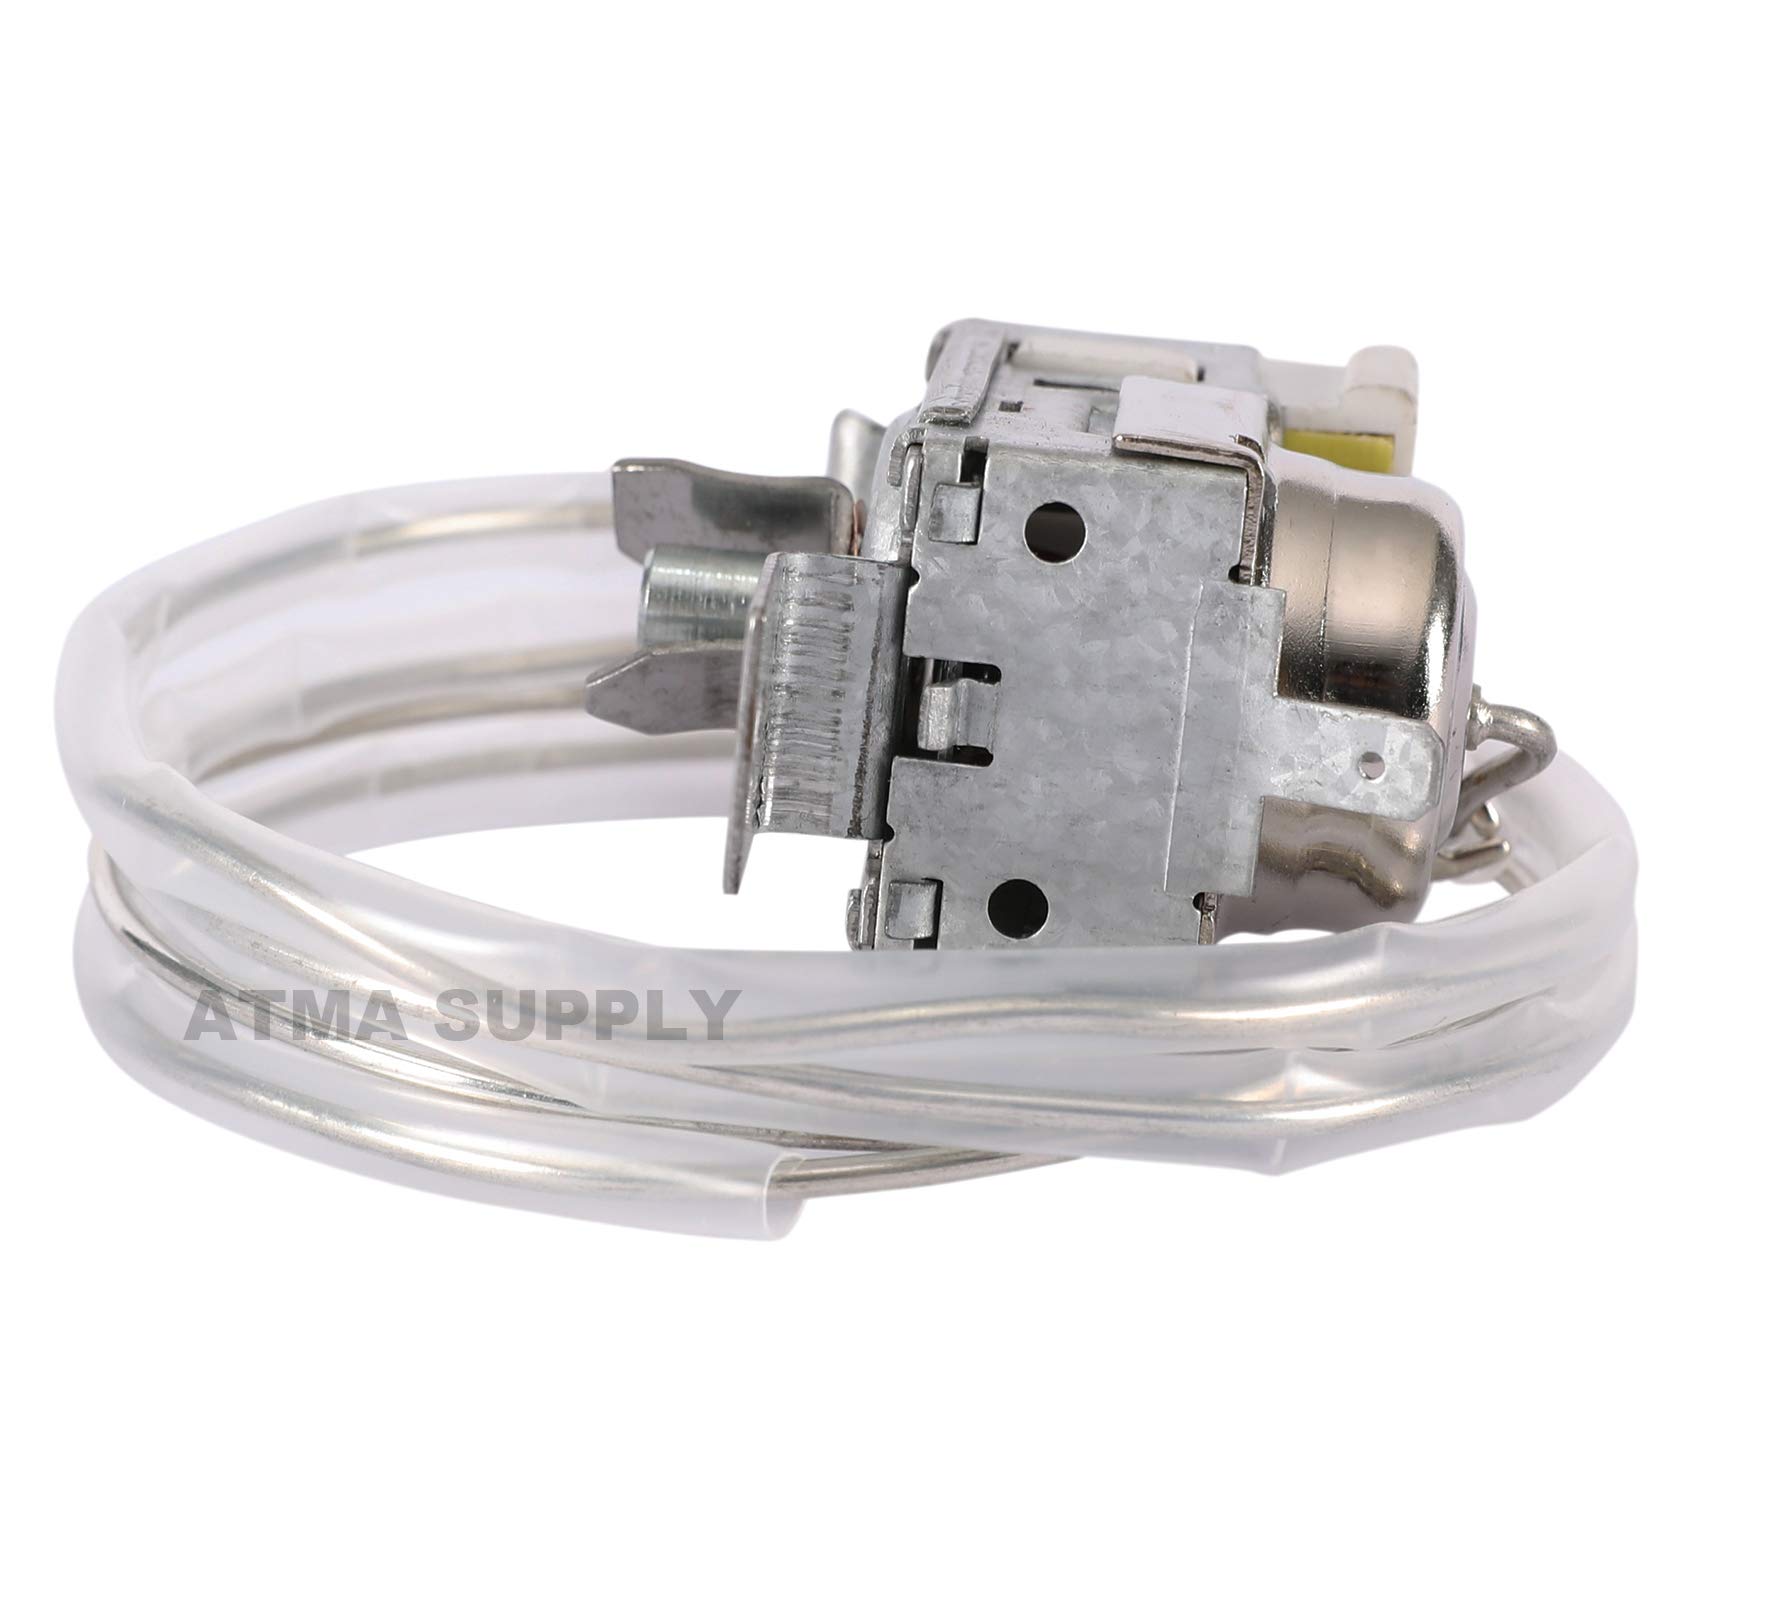 2198202 Refrigerator Temperature Control Thermostat Compatible with Whirlpool Kenmore Refrigerator Replaces WP2198202 PS11739232 2161284 2198201 AP6006166